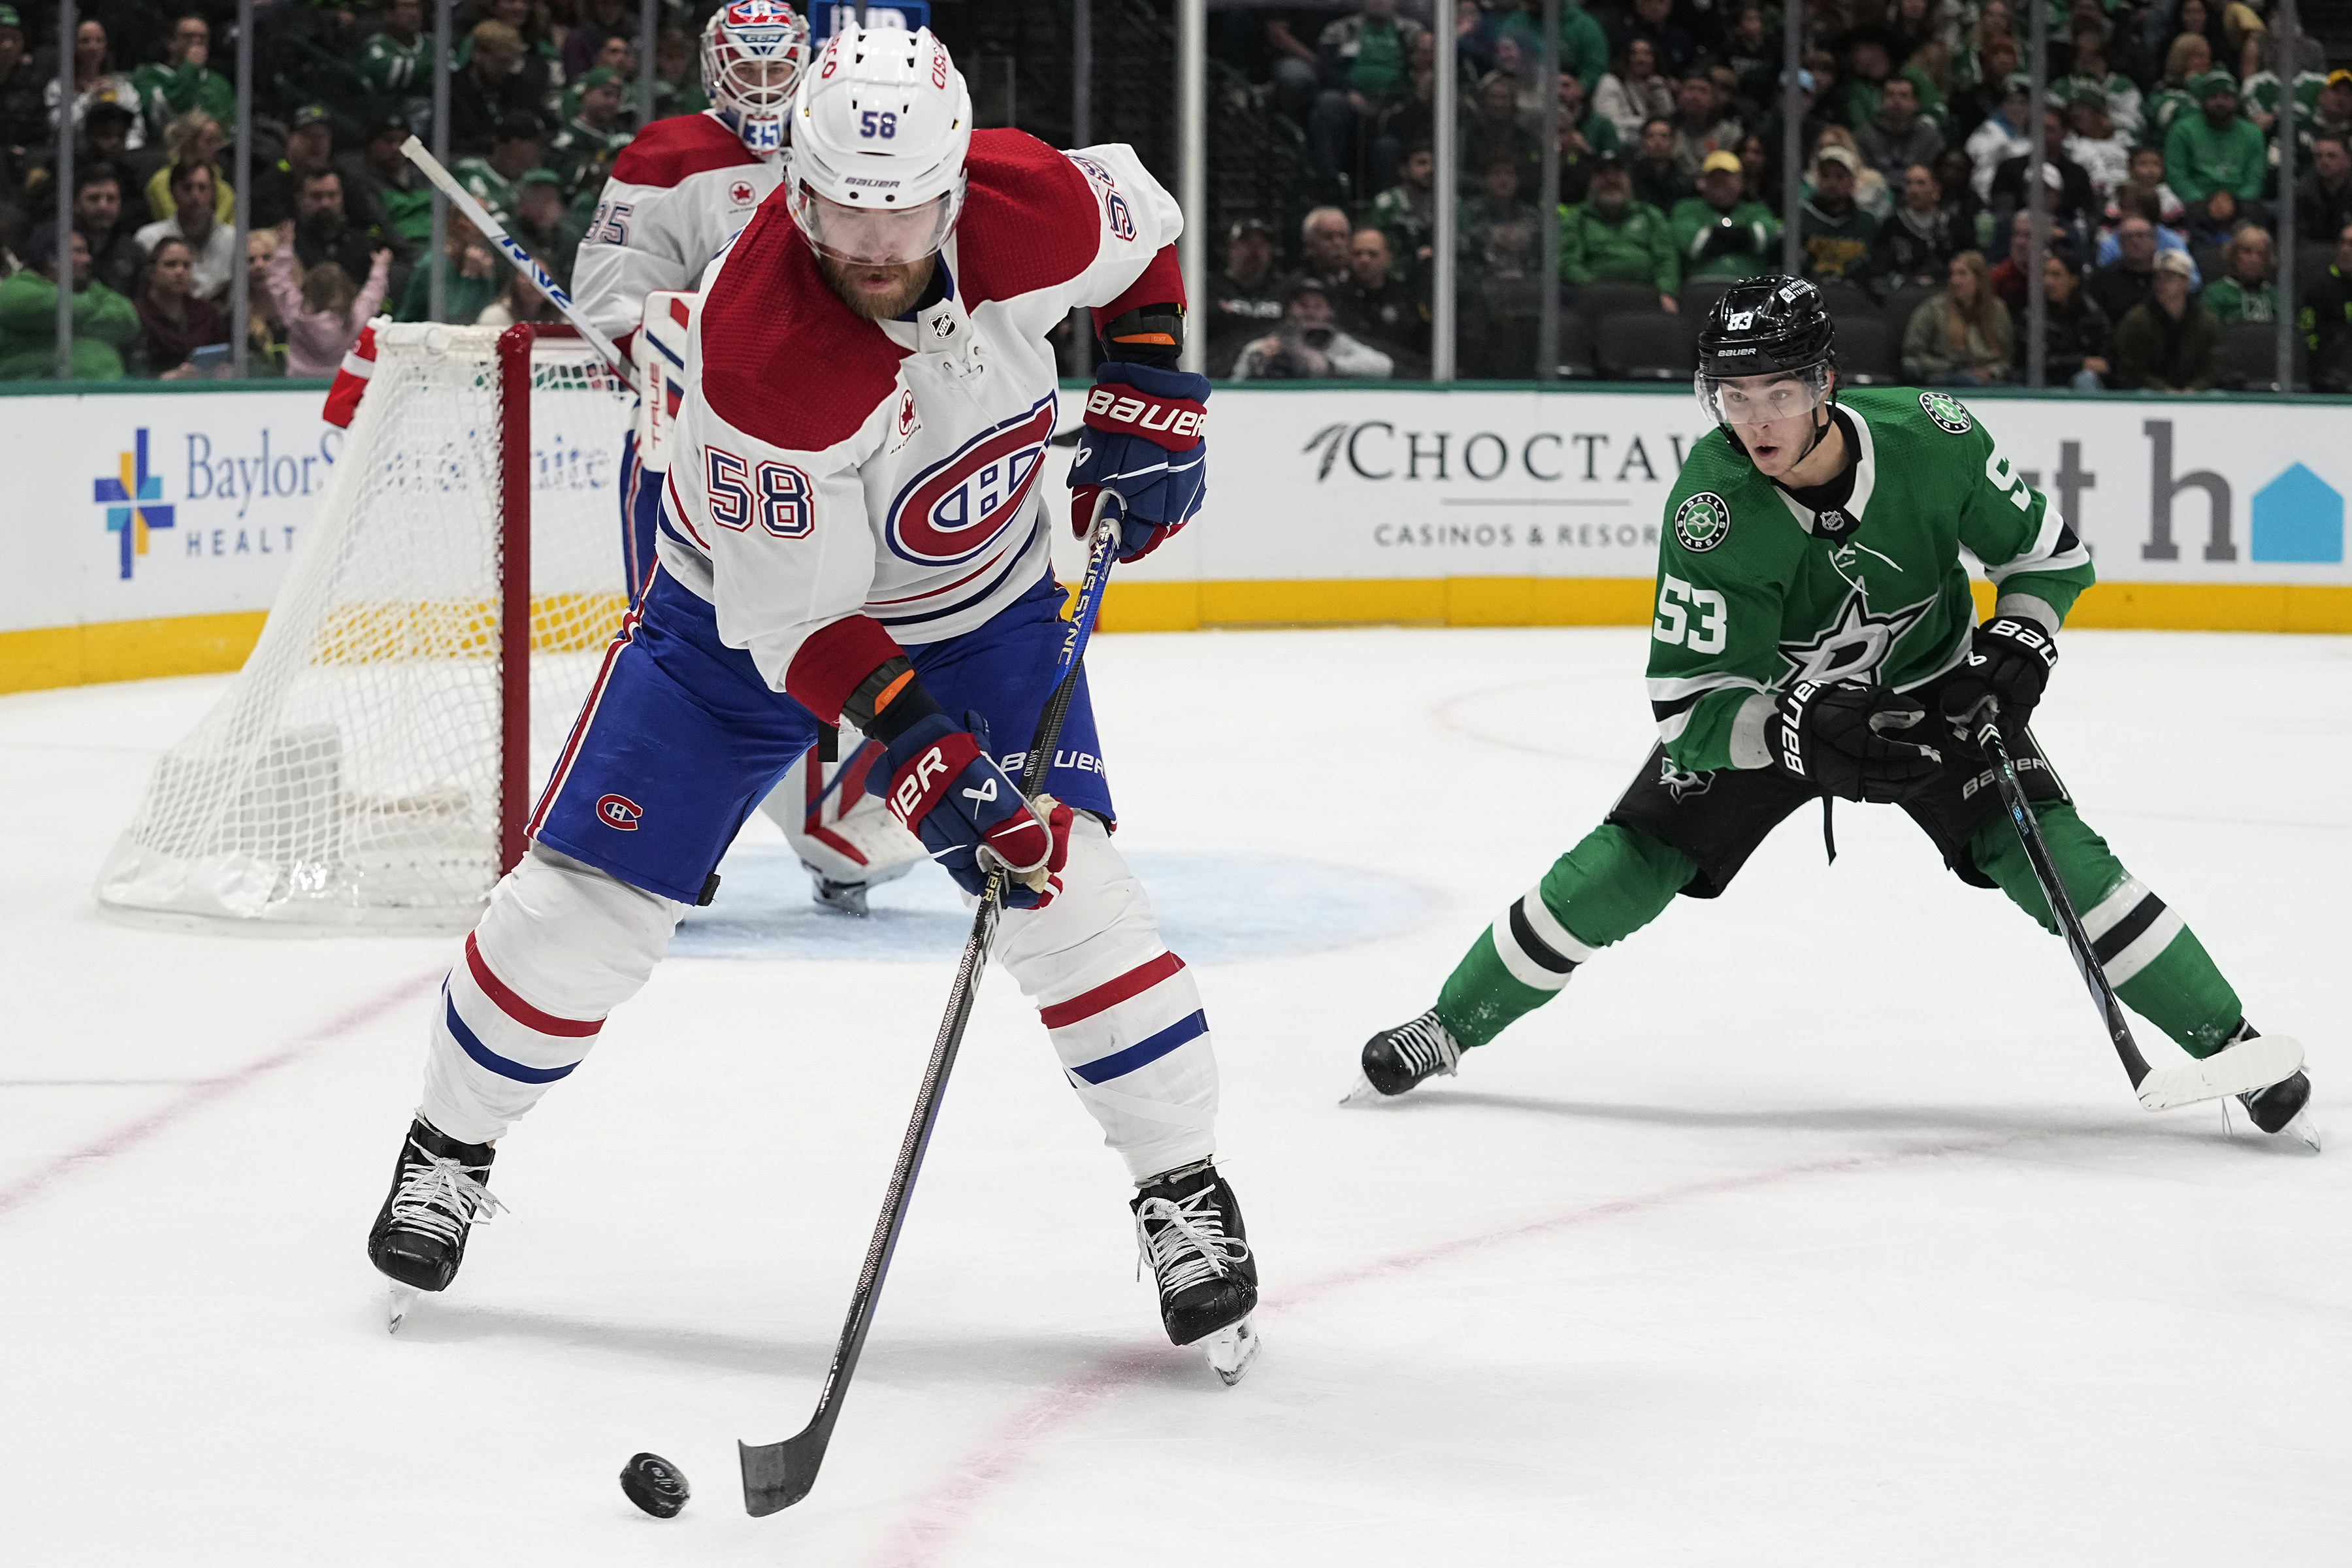 Call of the Wilde: Montreal Canadiens finish road trip with 4-3 win over Dallas Stars